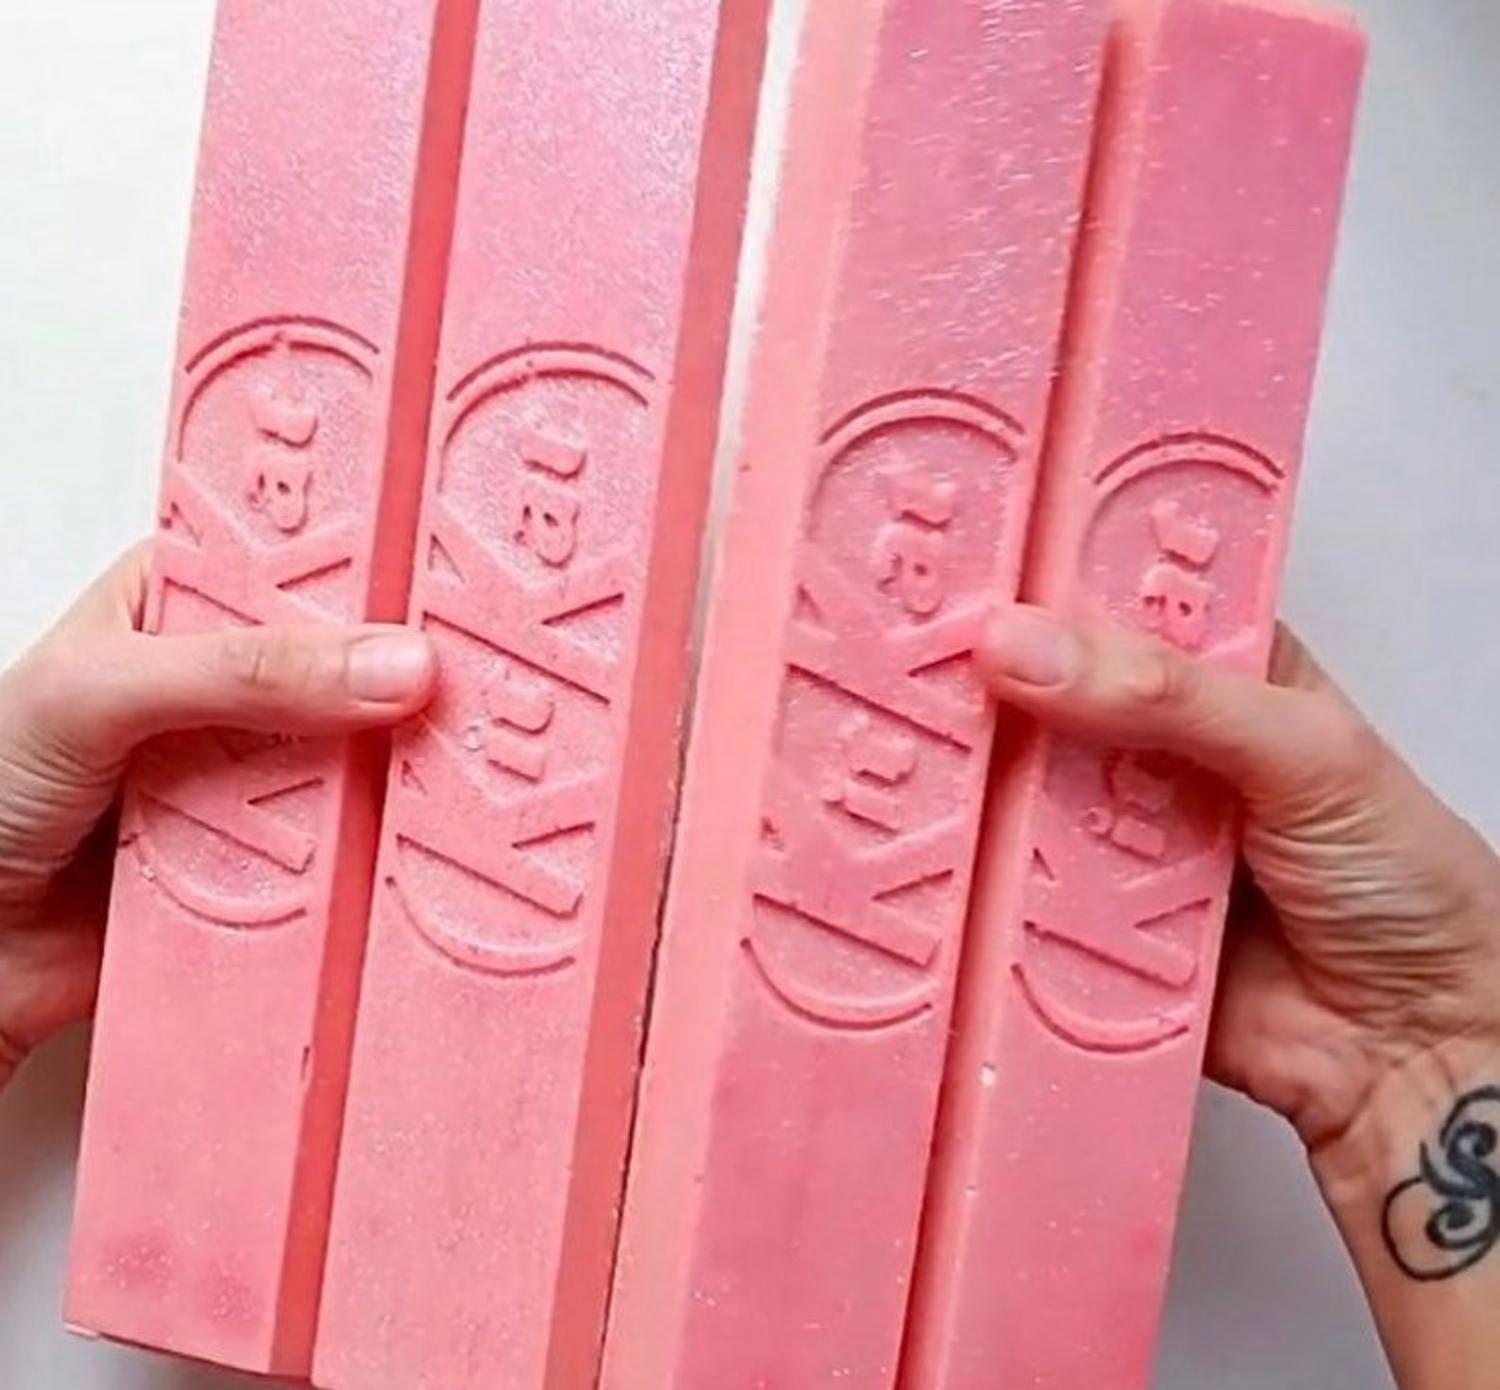 A man breaking the pink-colored Giant Kit-Kat Mold